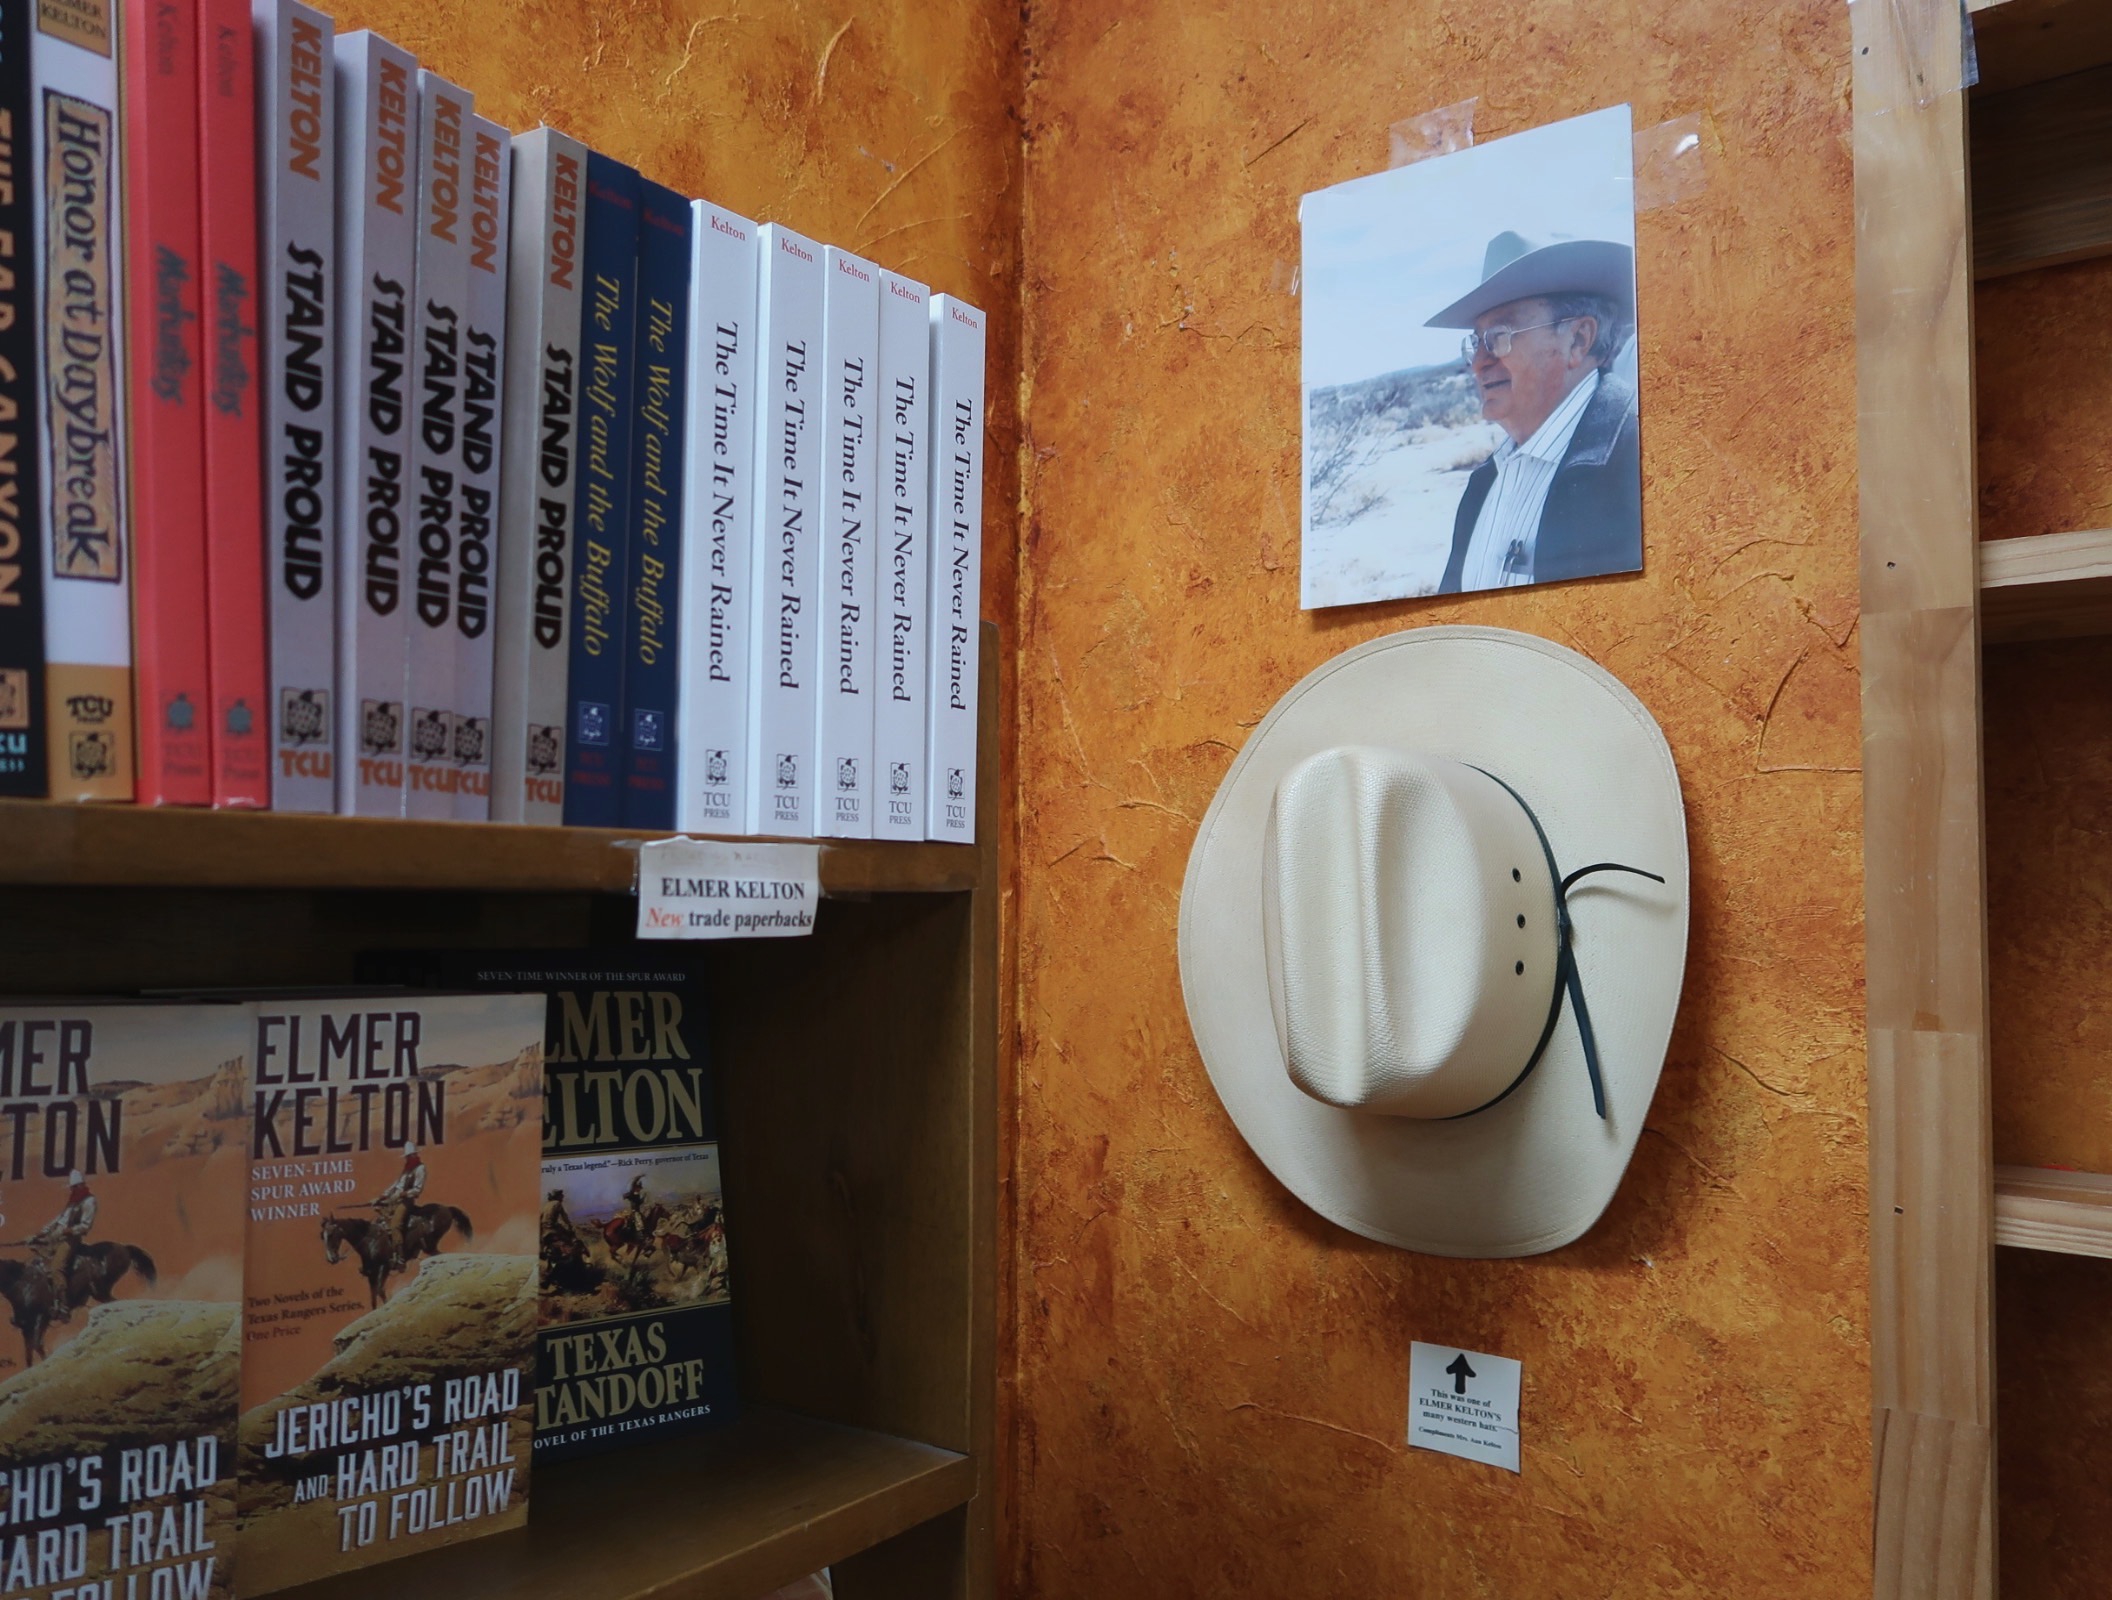 Books sit on shelves against a wall bext to a hanging cowboy hat and photo of author Elmer Kelton